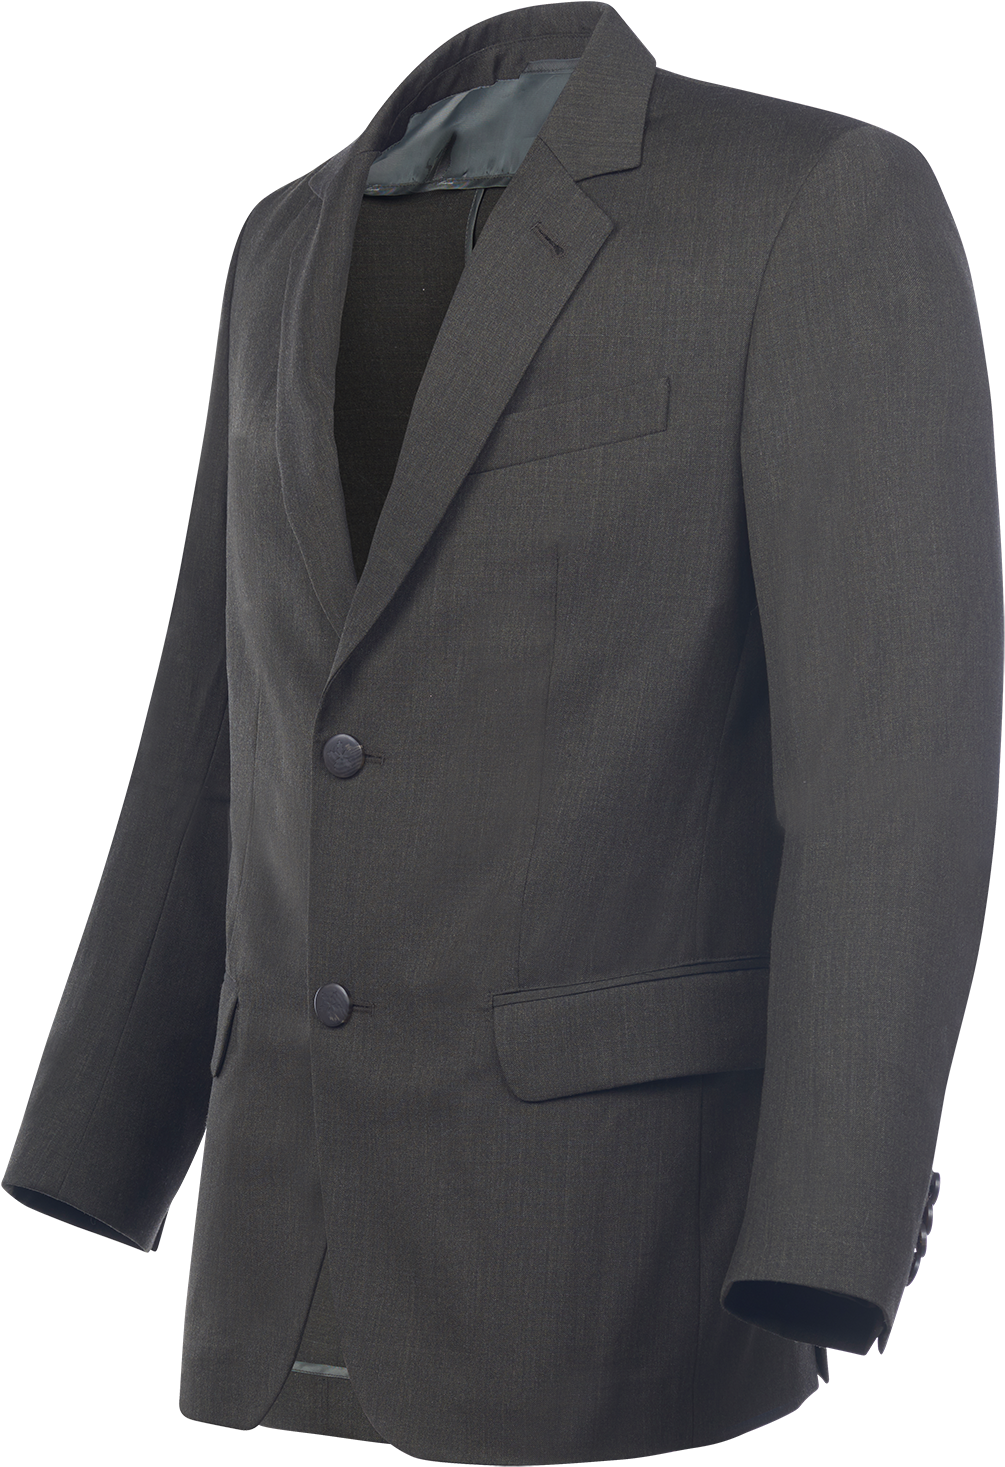 A Grey Suit With Buttons